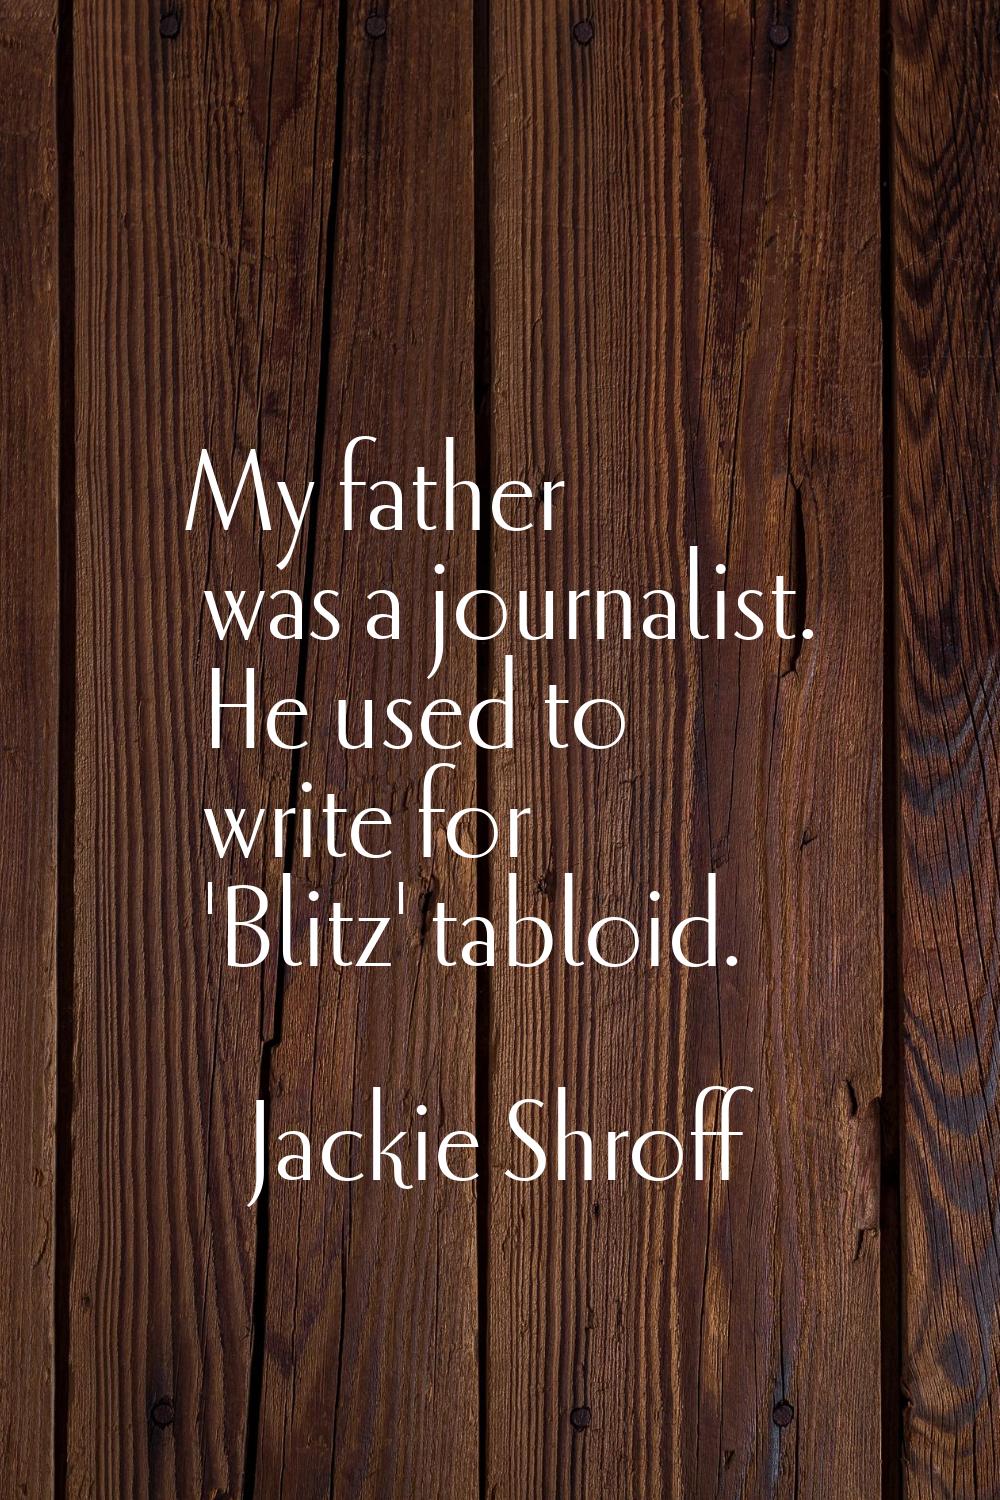 My father was a journalist. He used to write for 'Blitz' tabloid.